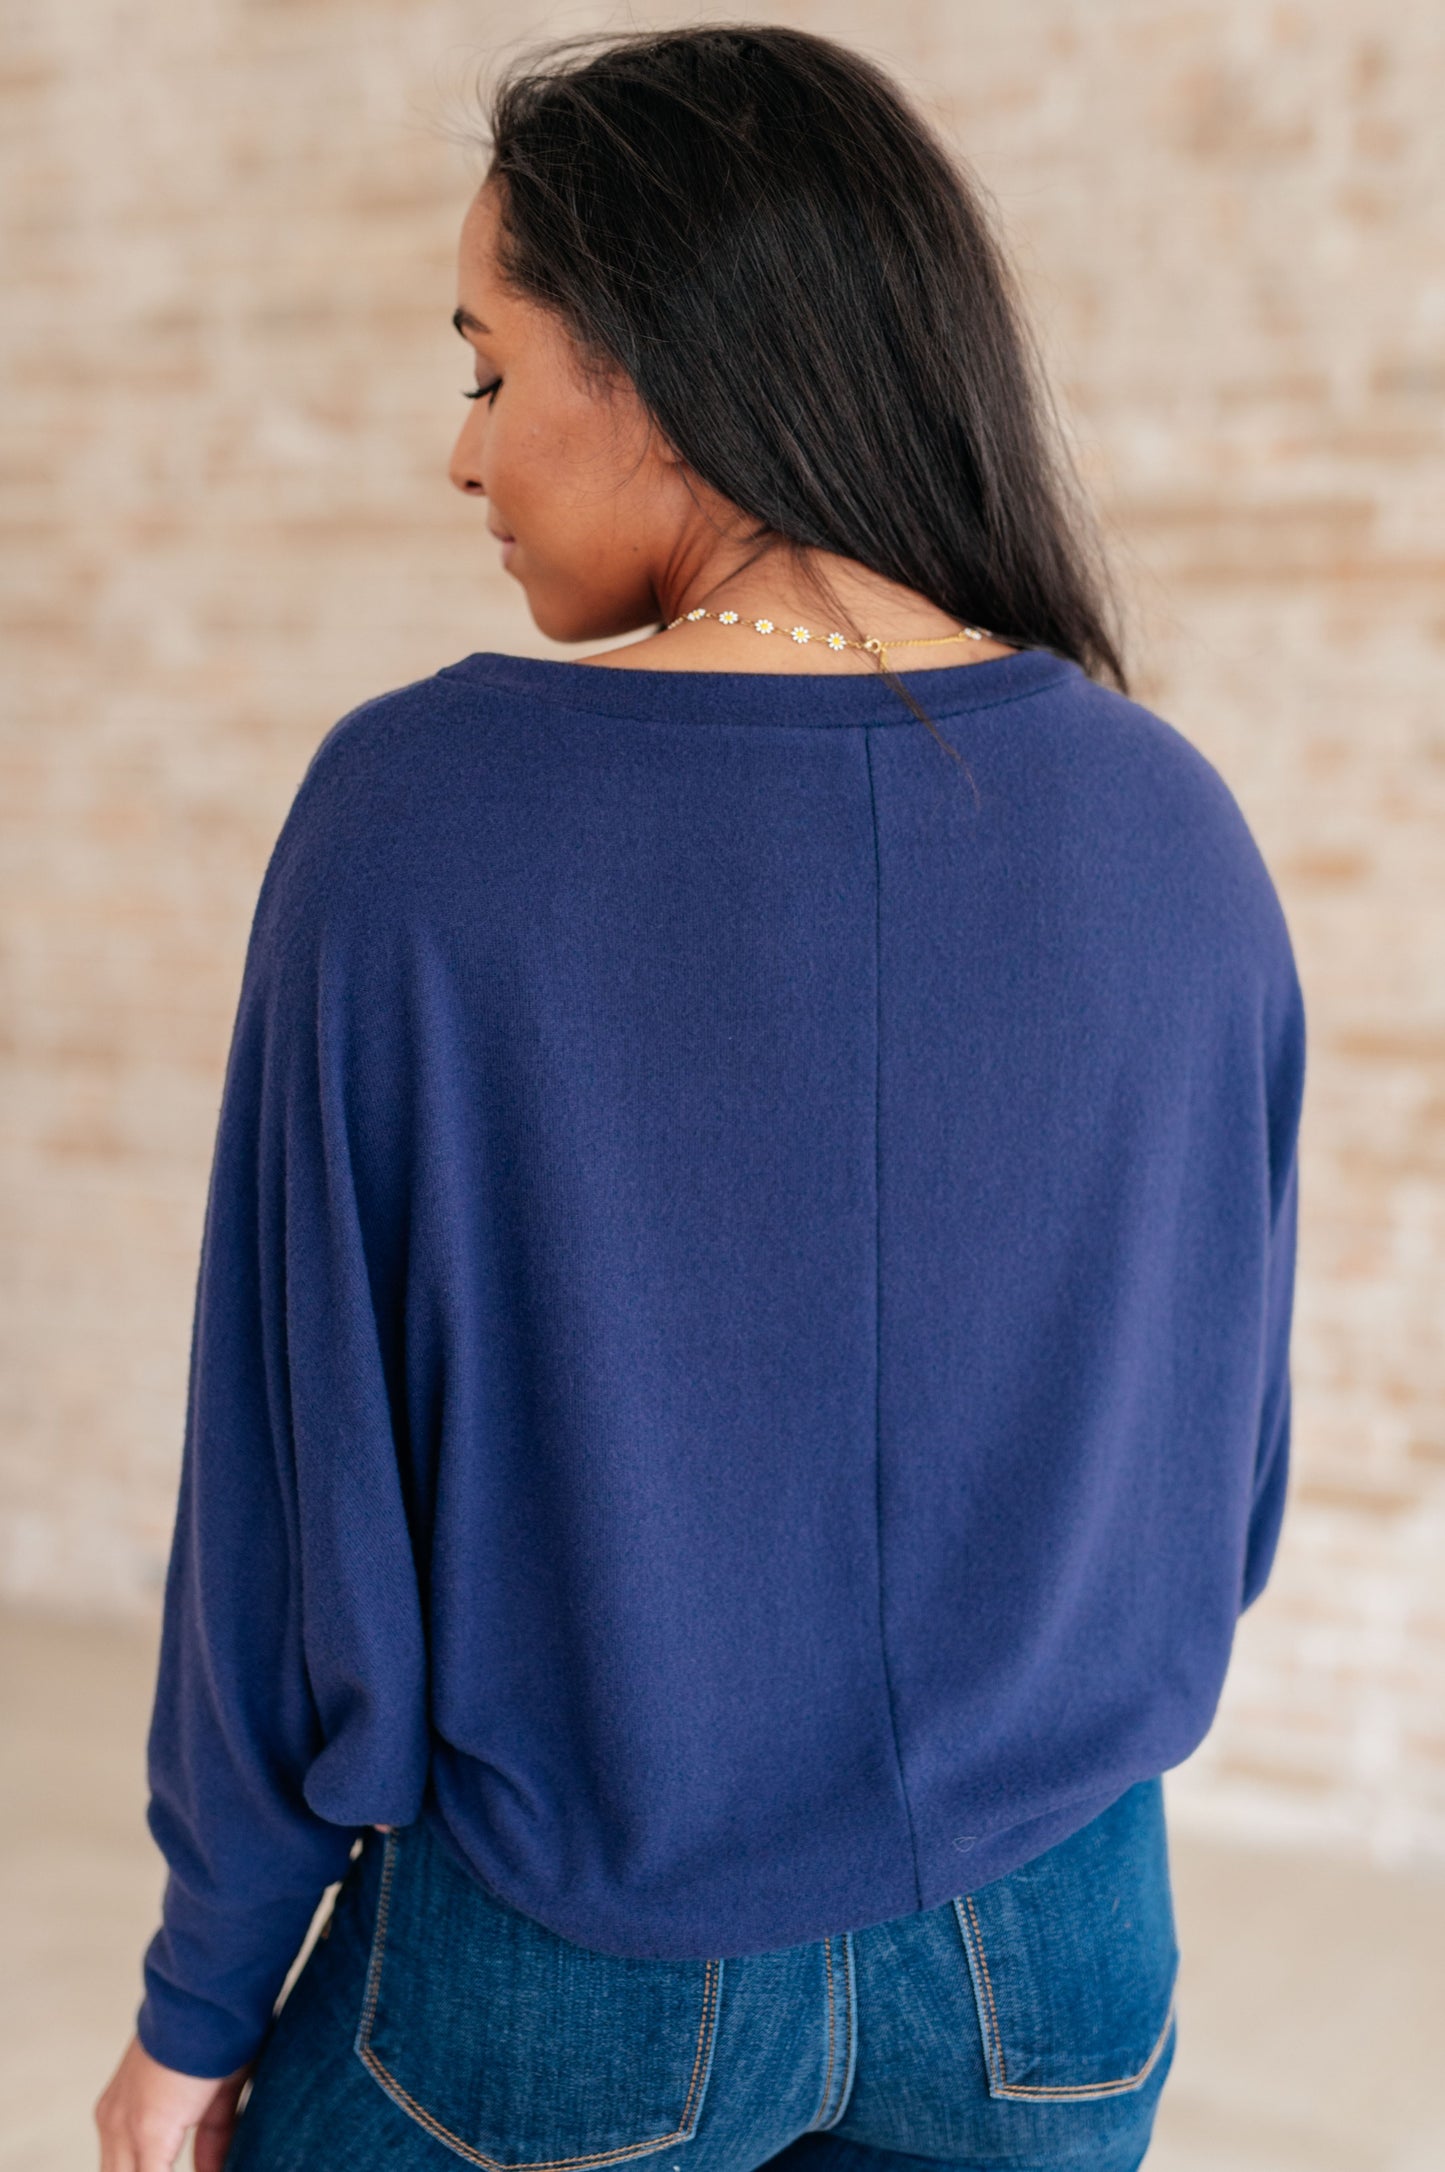 Casually Comfy Batwing Top in Navy